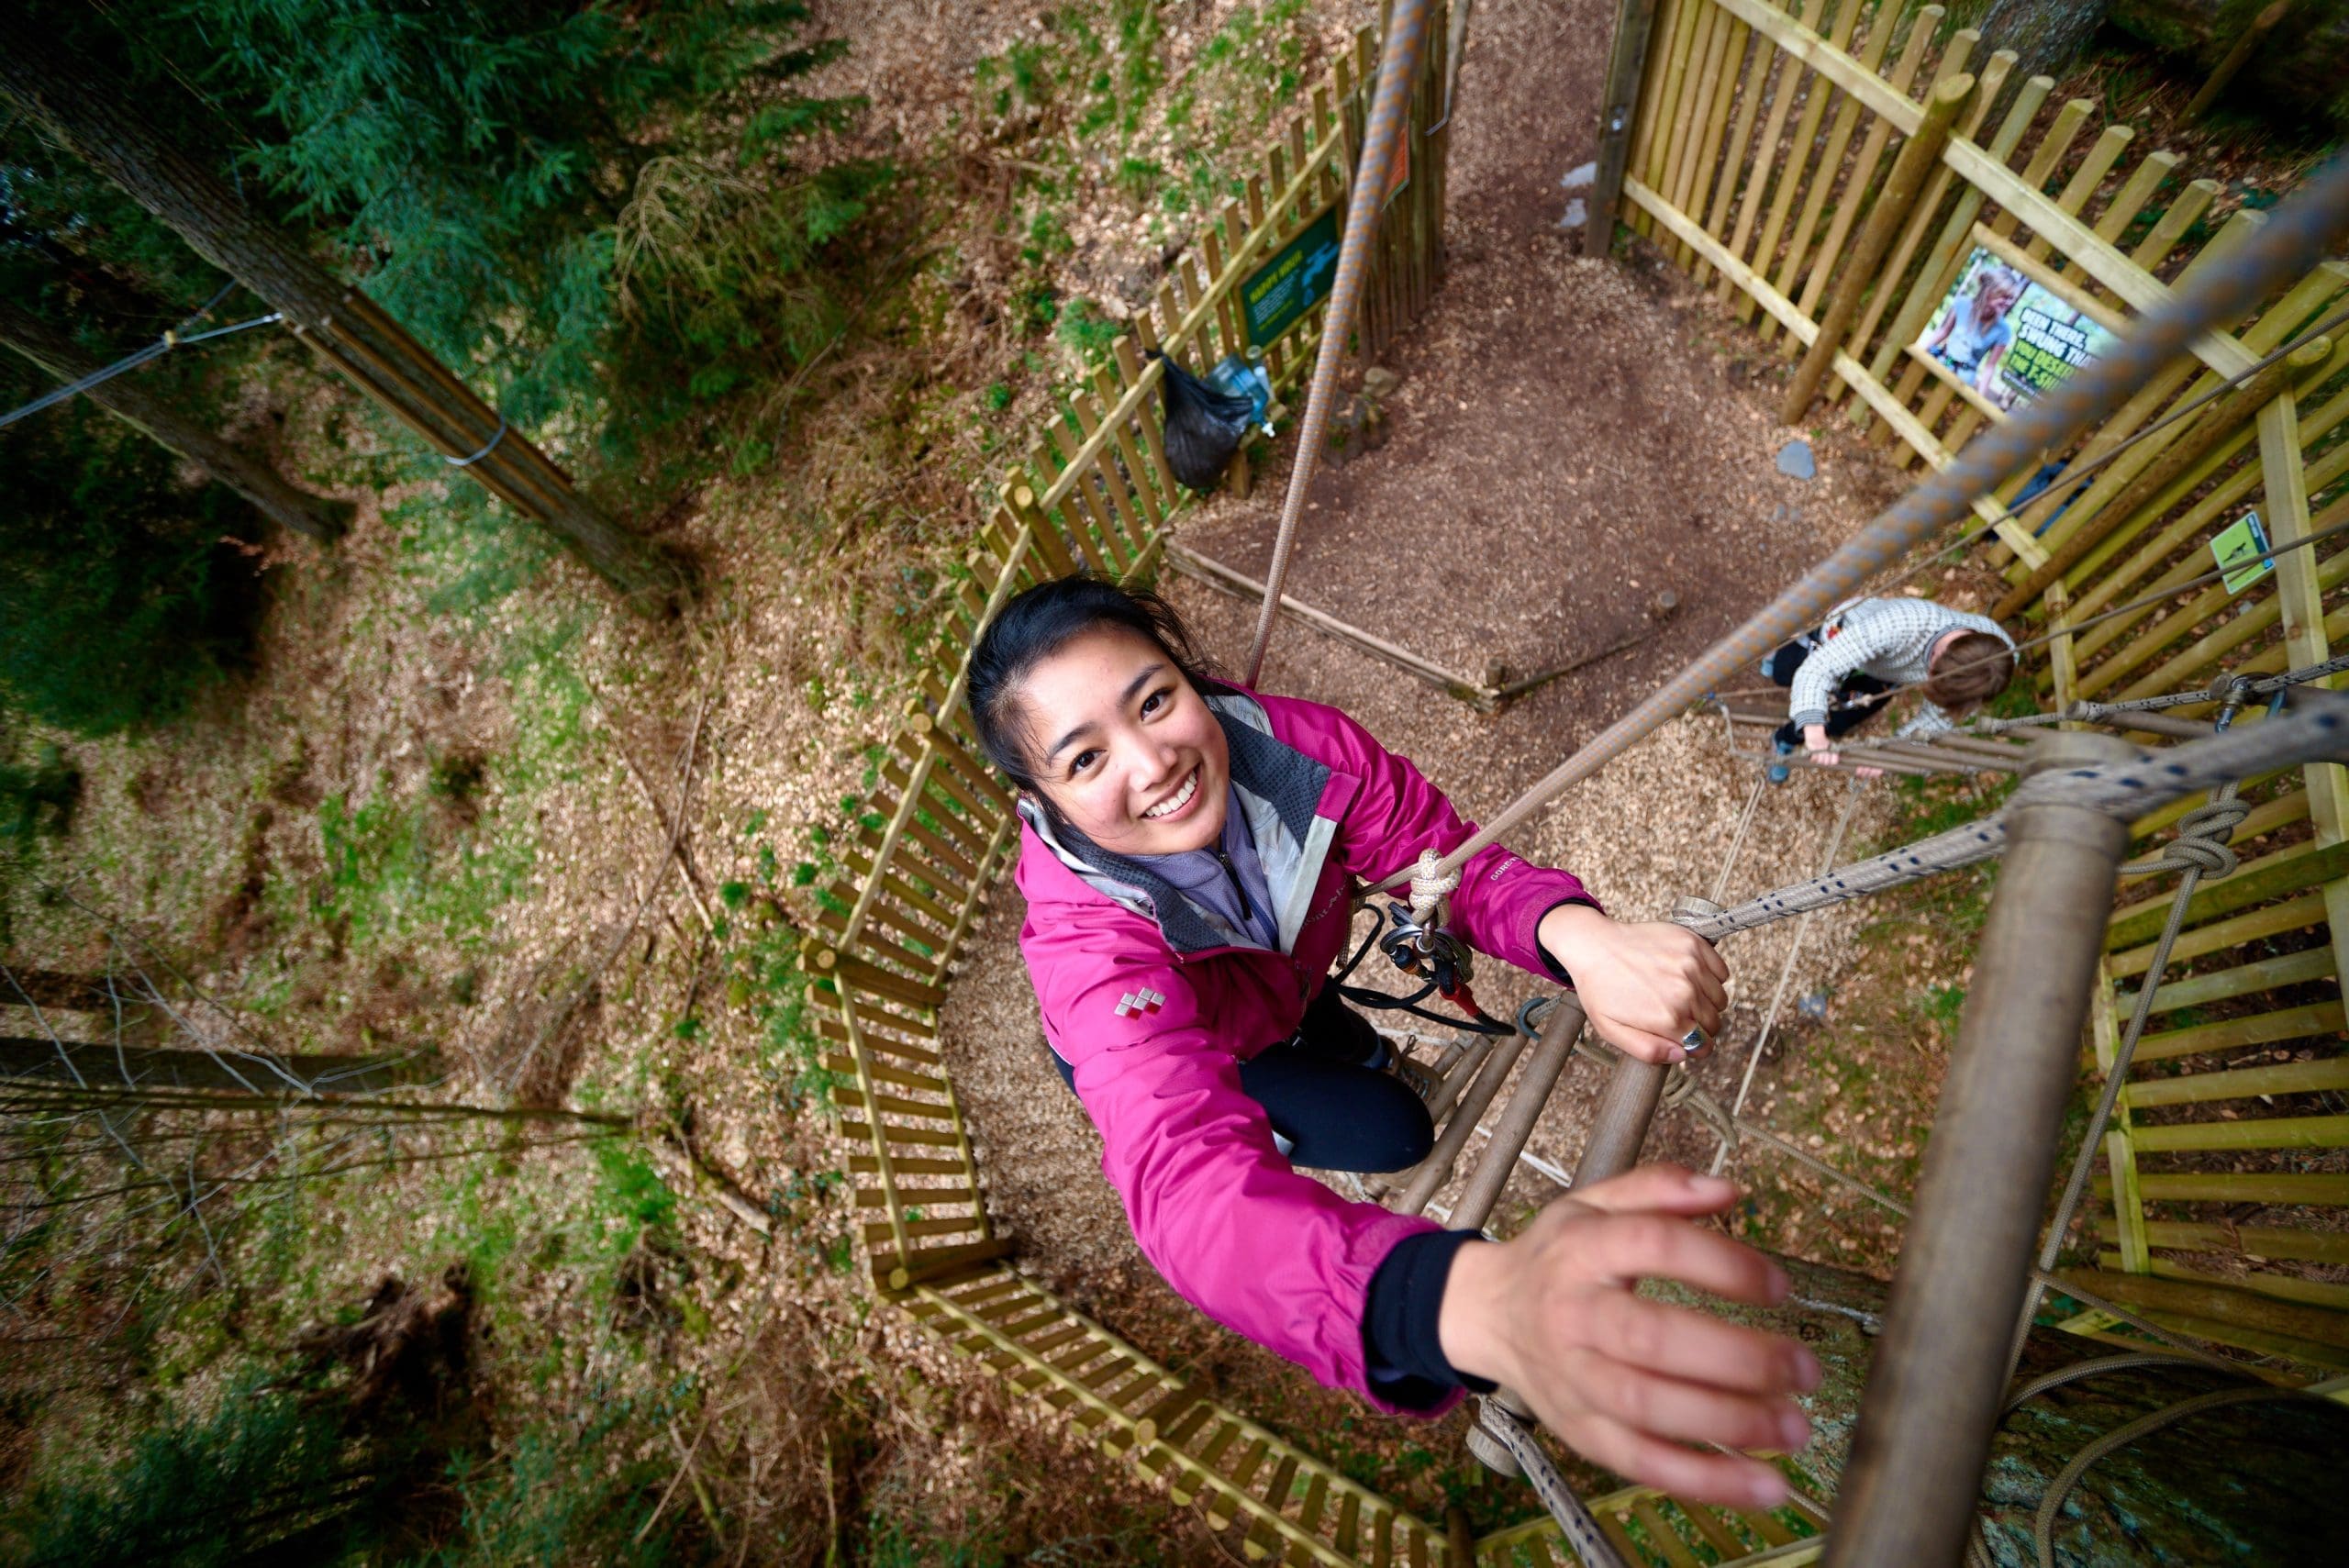 Climbing high at Go Ape, one of the best venues in Surrey